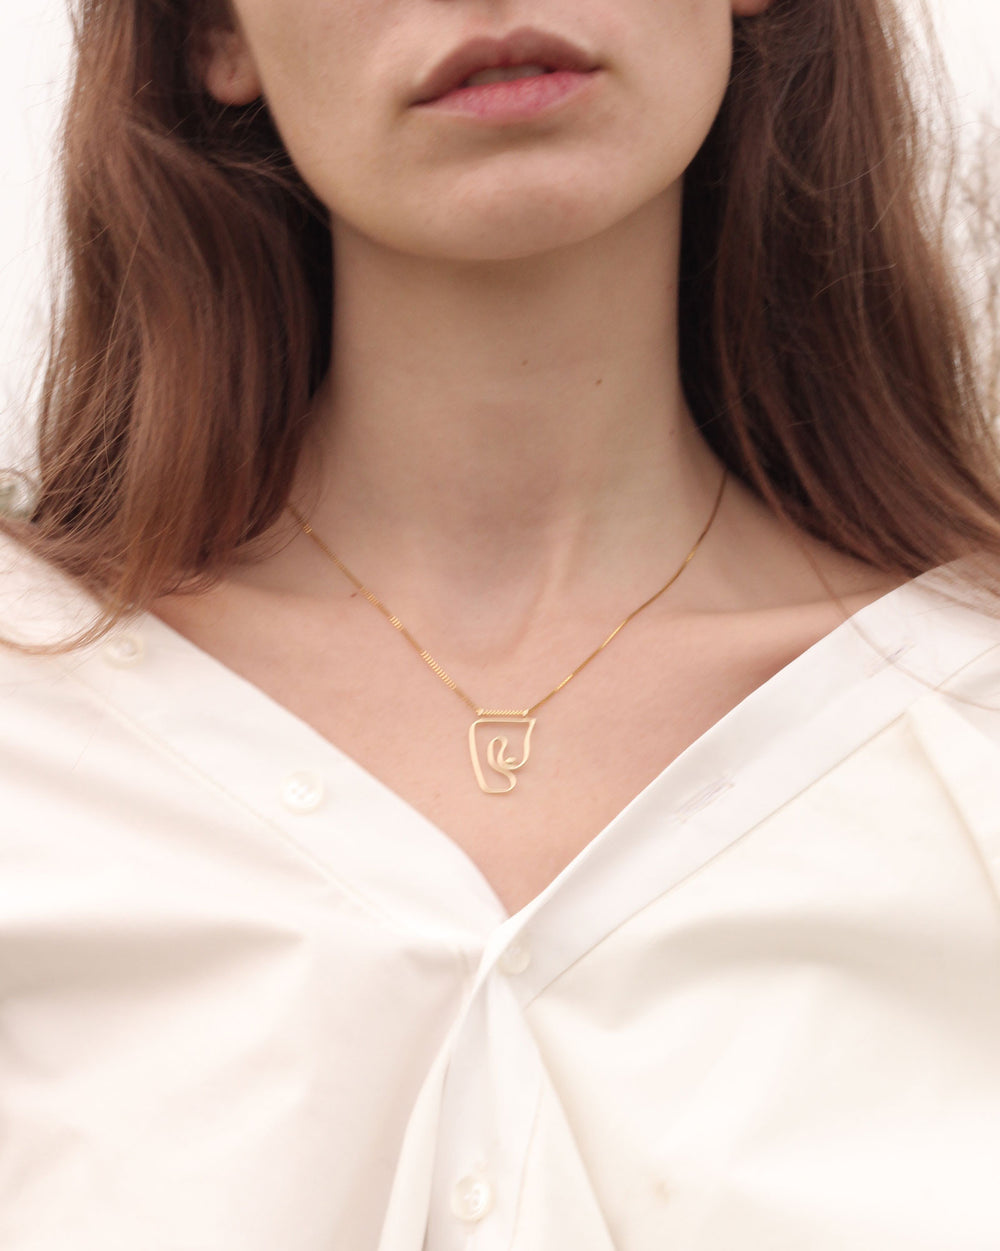 Deconstructed Nude Necklace